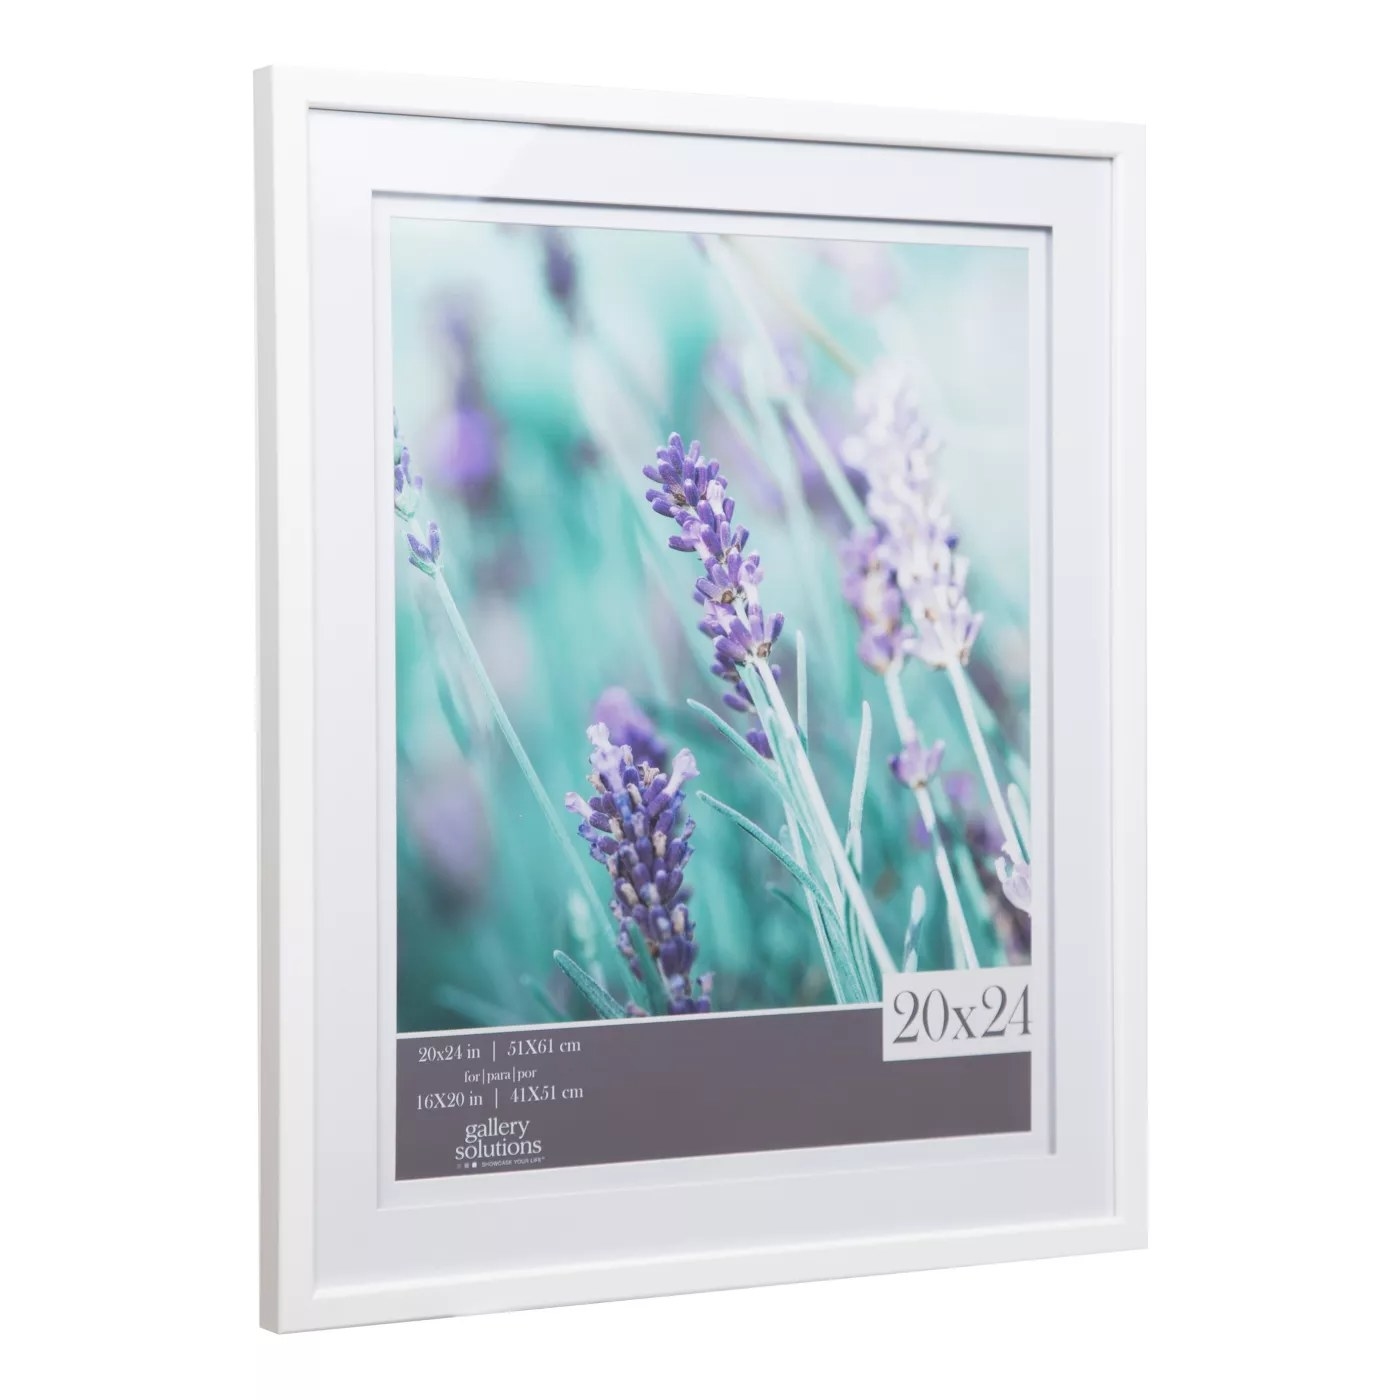 The 20x24-inch, white, double-matted picture frame